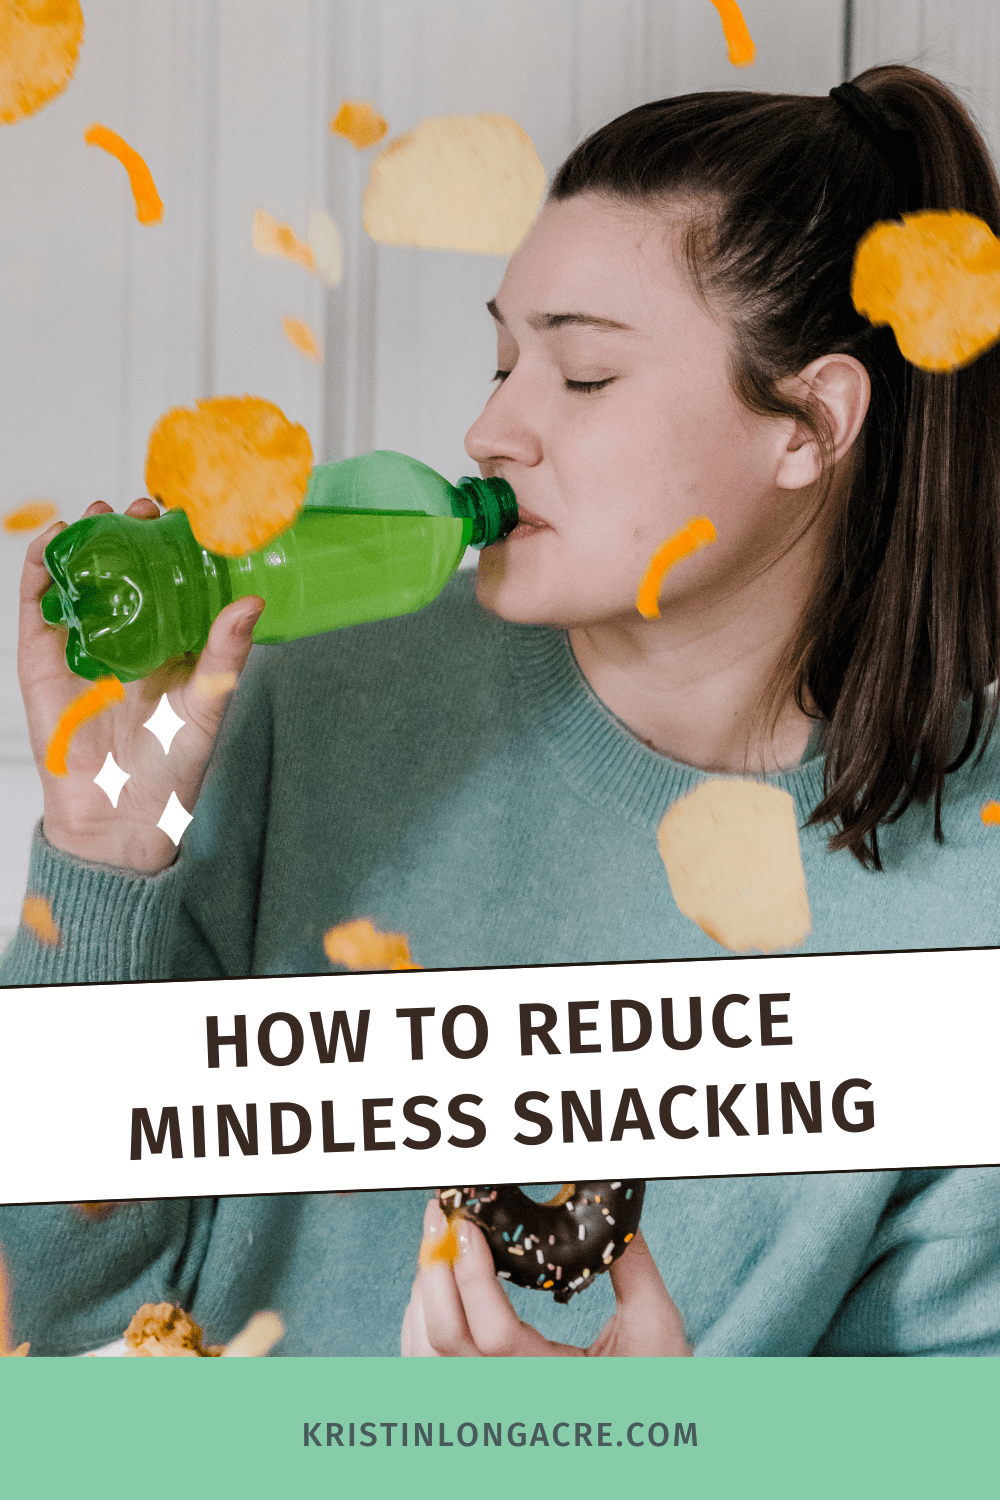 How To Reduce Mindless Snacking